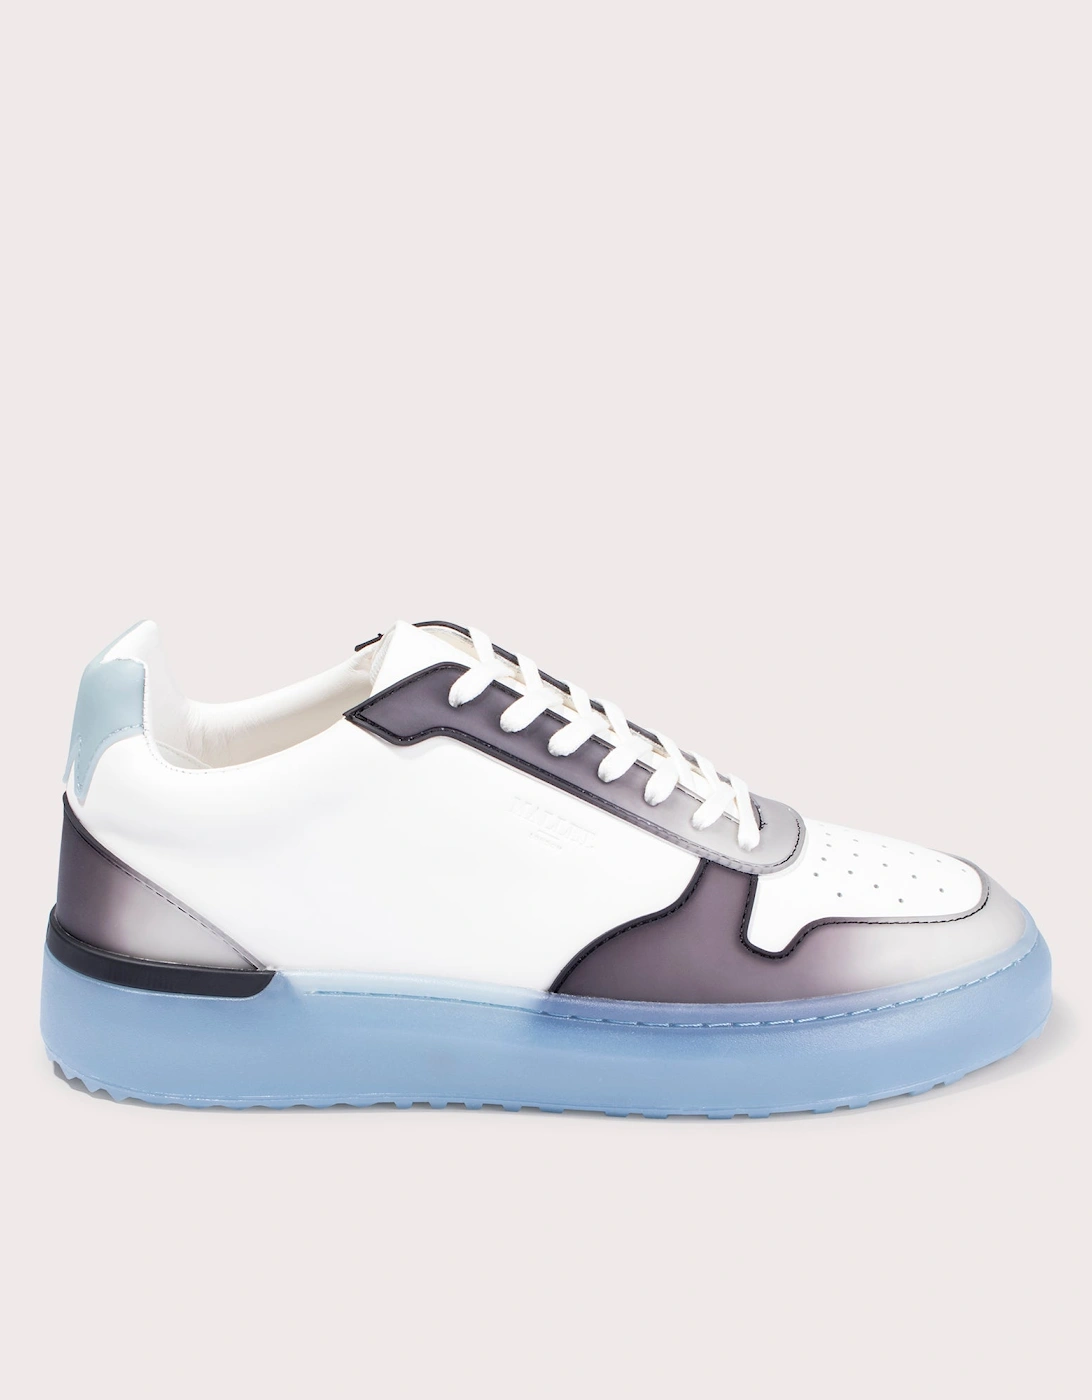 Hoxton 2.0 Sneakers, 5 of 4